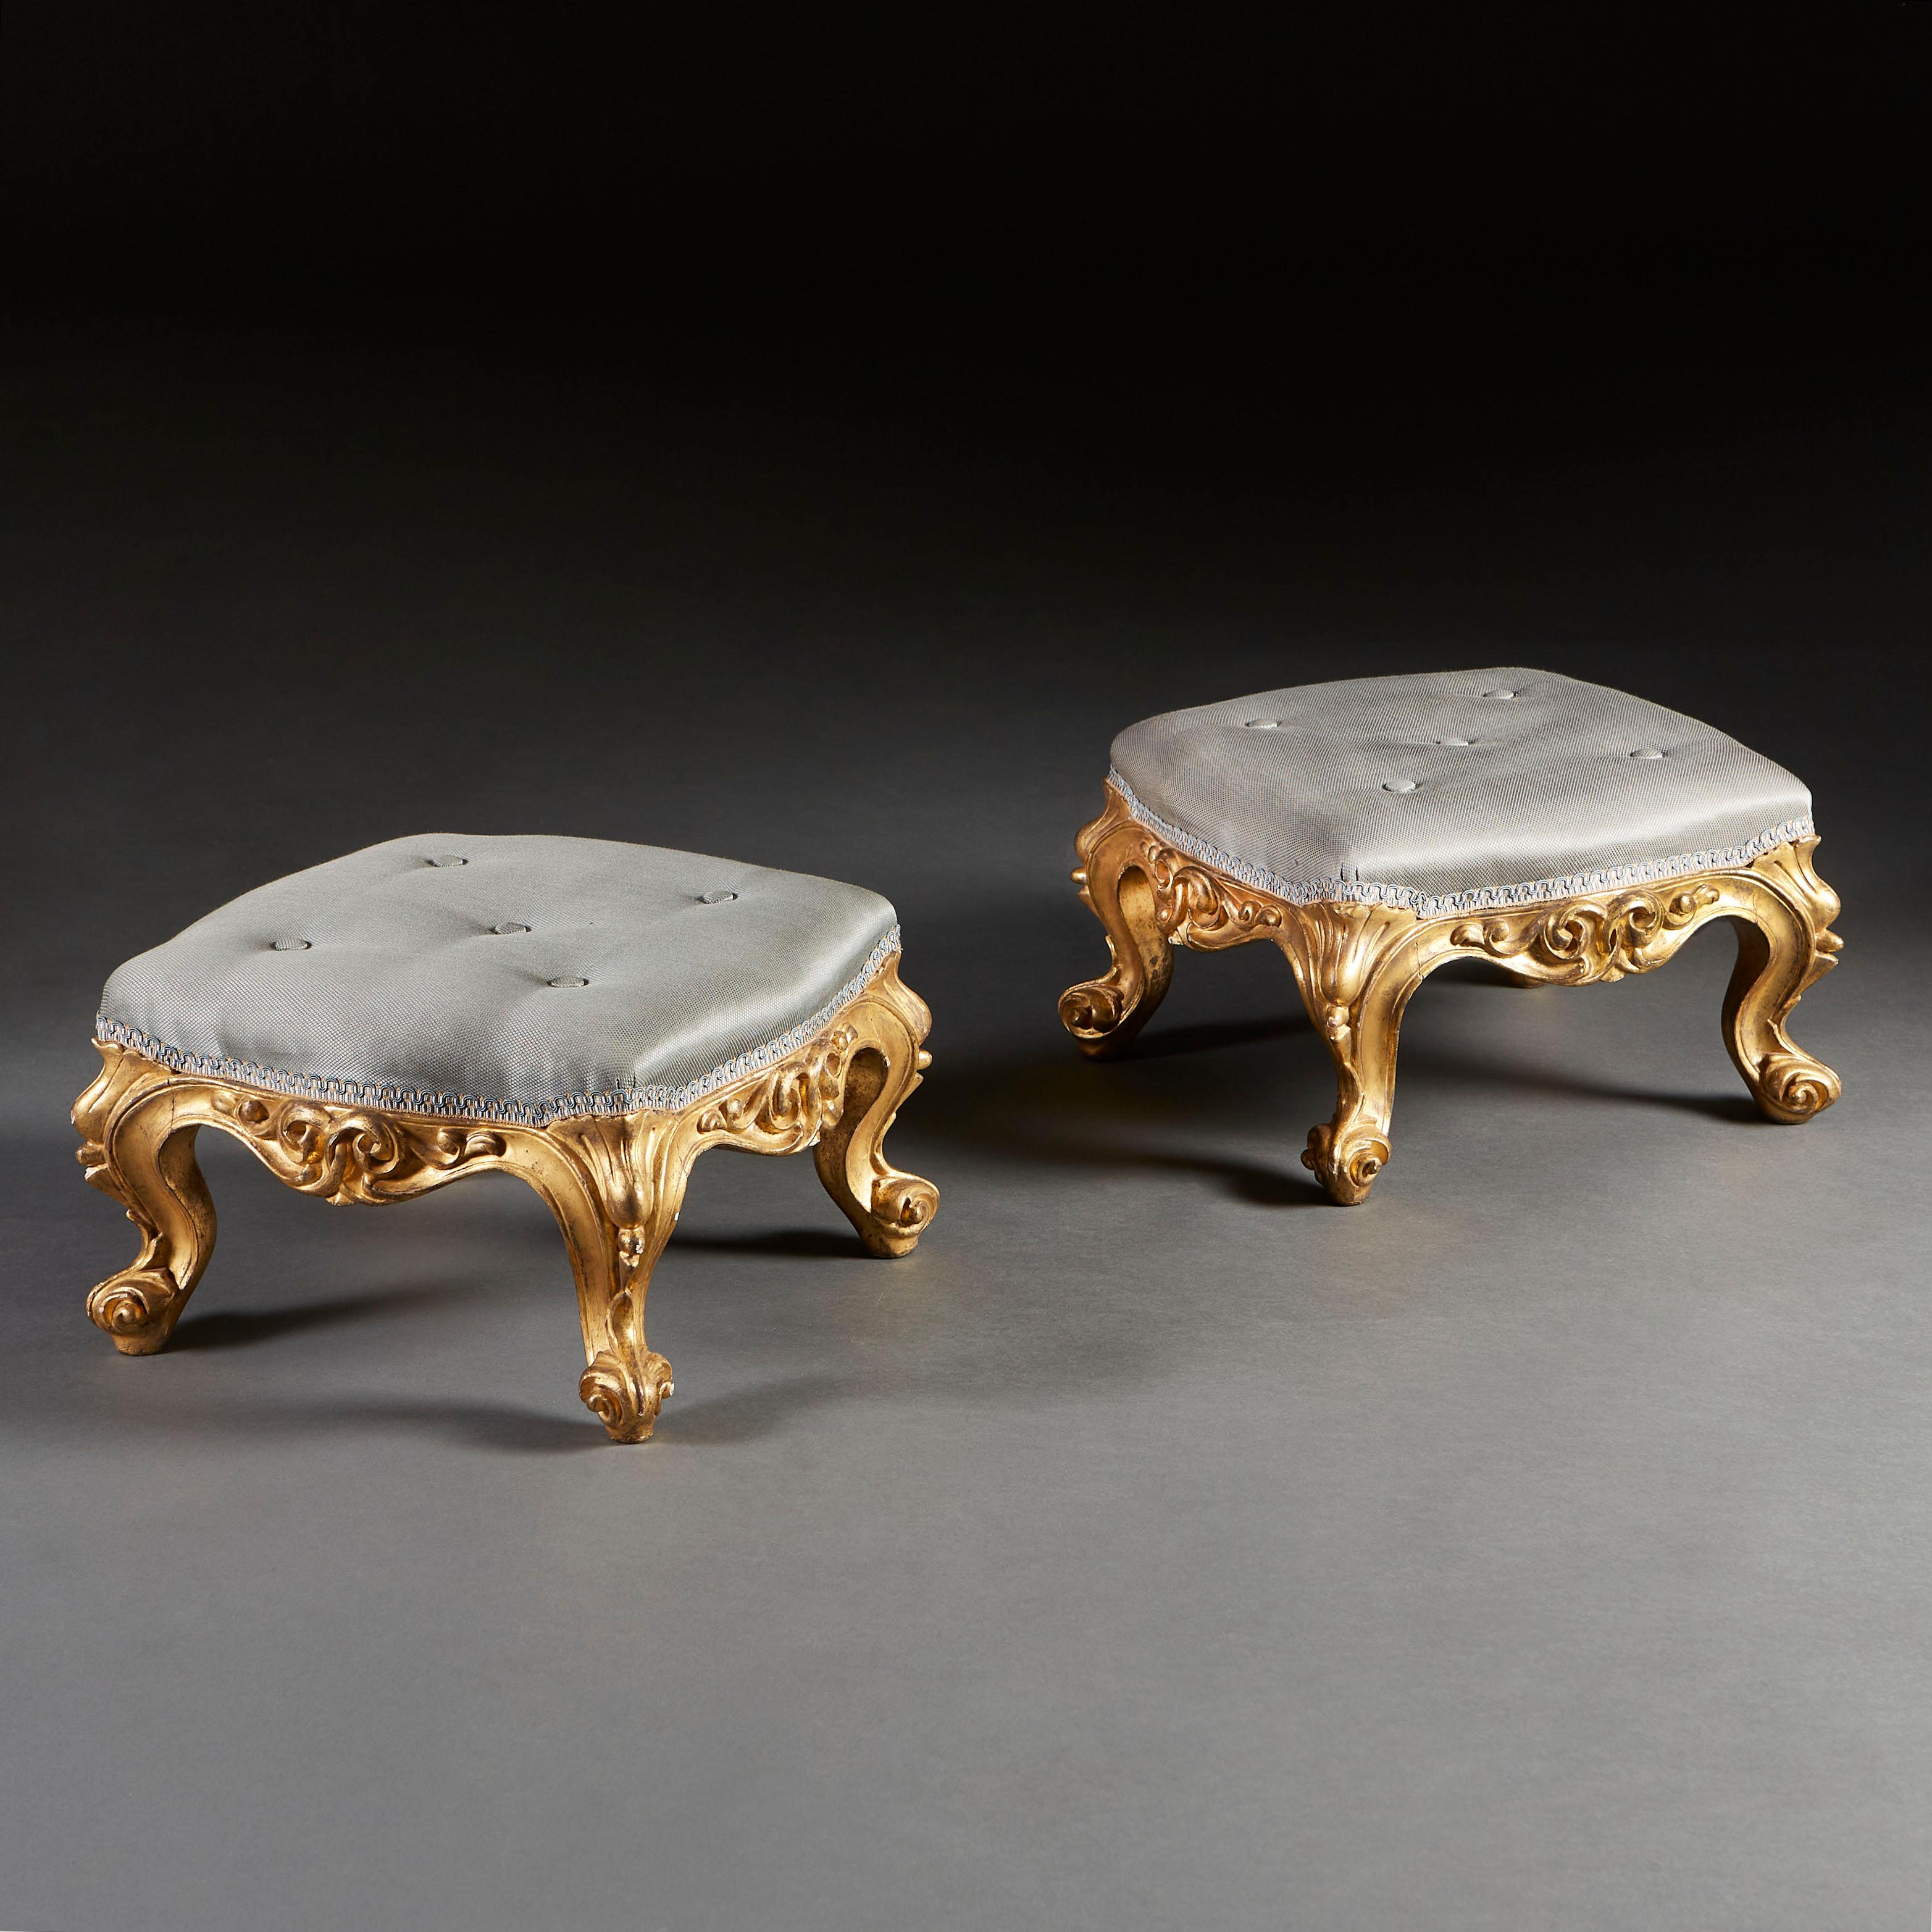 A fine pair of William IV giltwood footstools, with scrolling carving and cabriole legs with scroll feet, upholstered in blue fabric with float buttons.